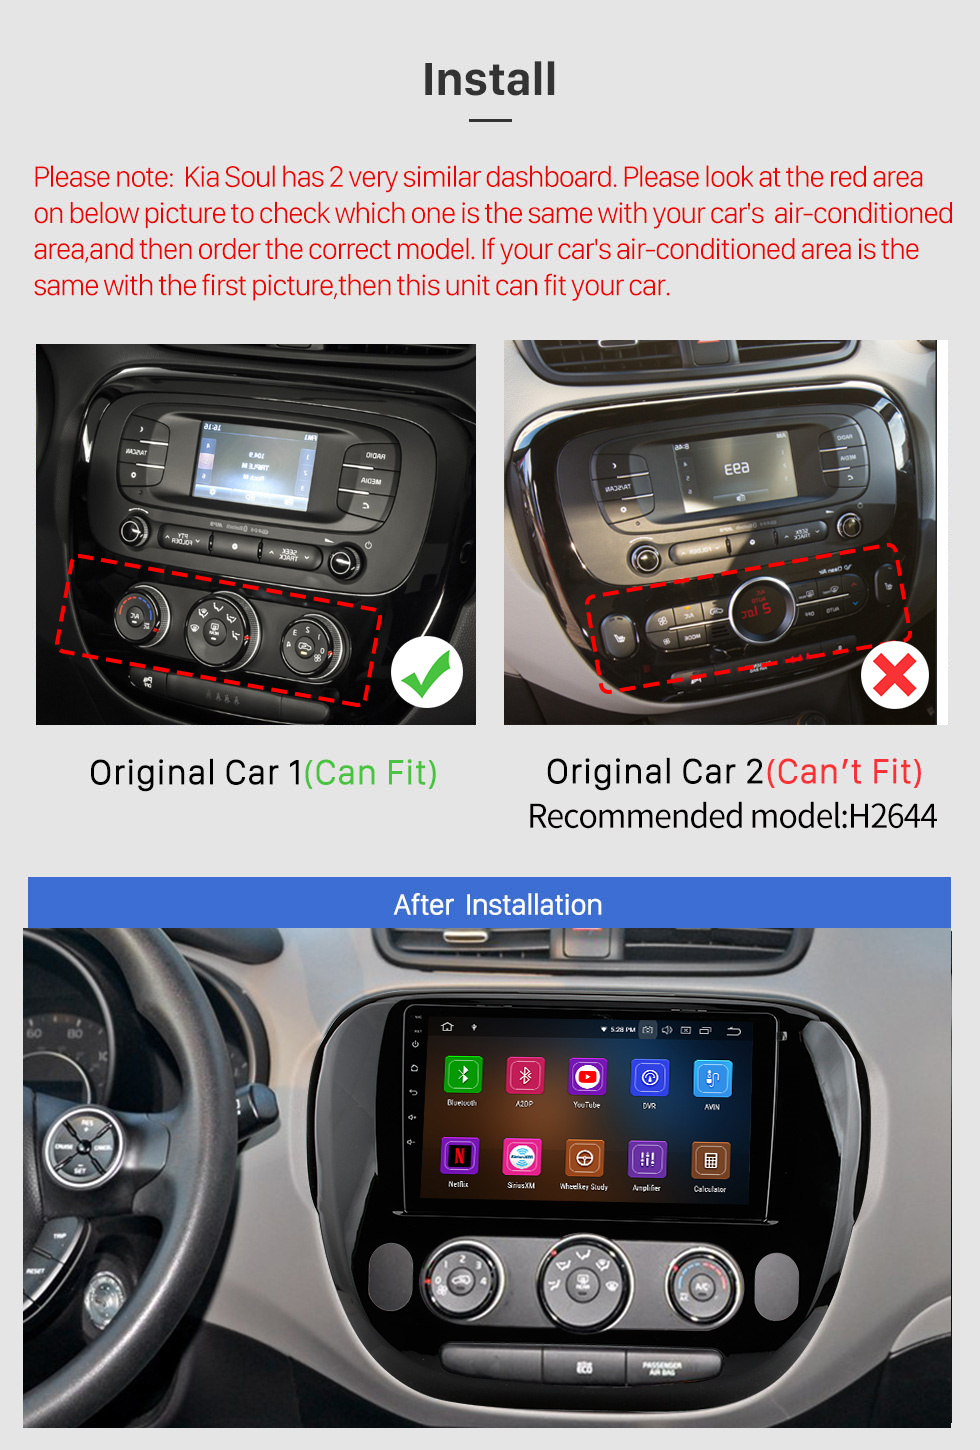 Seicane Blutooth Car Radio with Carplay GPS Navigation For 2014 Kia Soul Android 12.0 Touch Screen WIFI Support Picture in Picture Rear View Camera